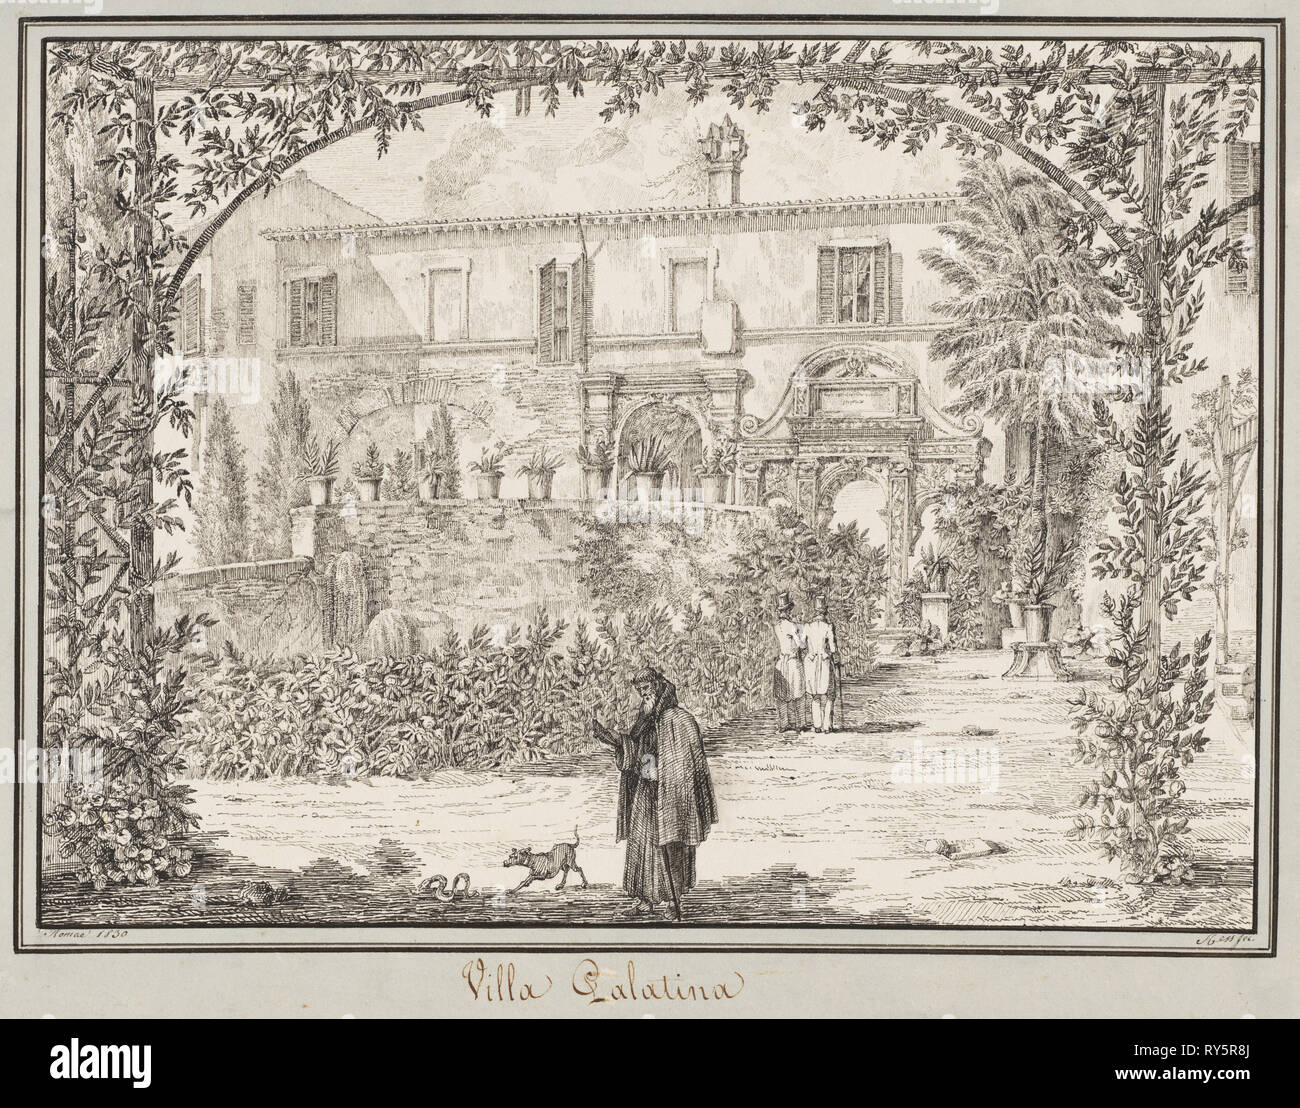 Villa Palatina, 1830. Peter Heinrich Lambert von Hess (German, 1792-1871). Pen and black ink with faint traces of graphite; framing lines in black ink, with gray wash border; sheet: 26.8 x 35.2 cm (10 9/16 x 13 7/8 in.); image: 19.3 x 26 cm (7 5/8 x 10 1/4 in Stock Photo